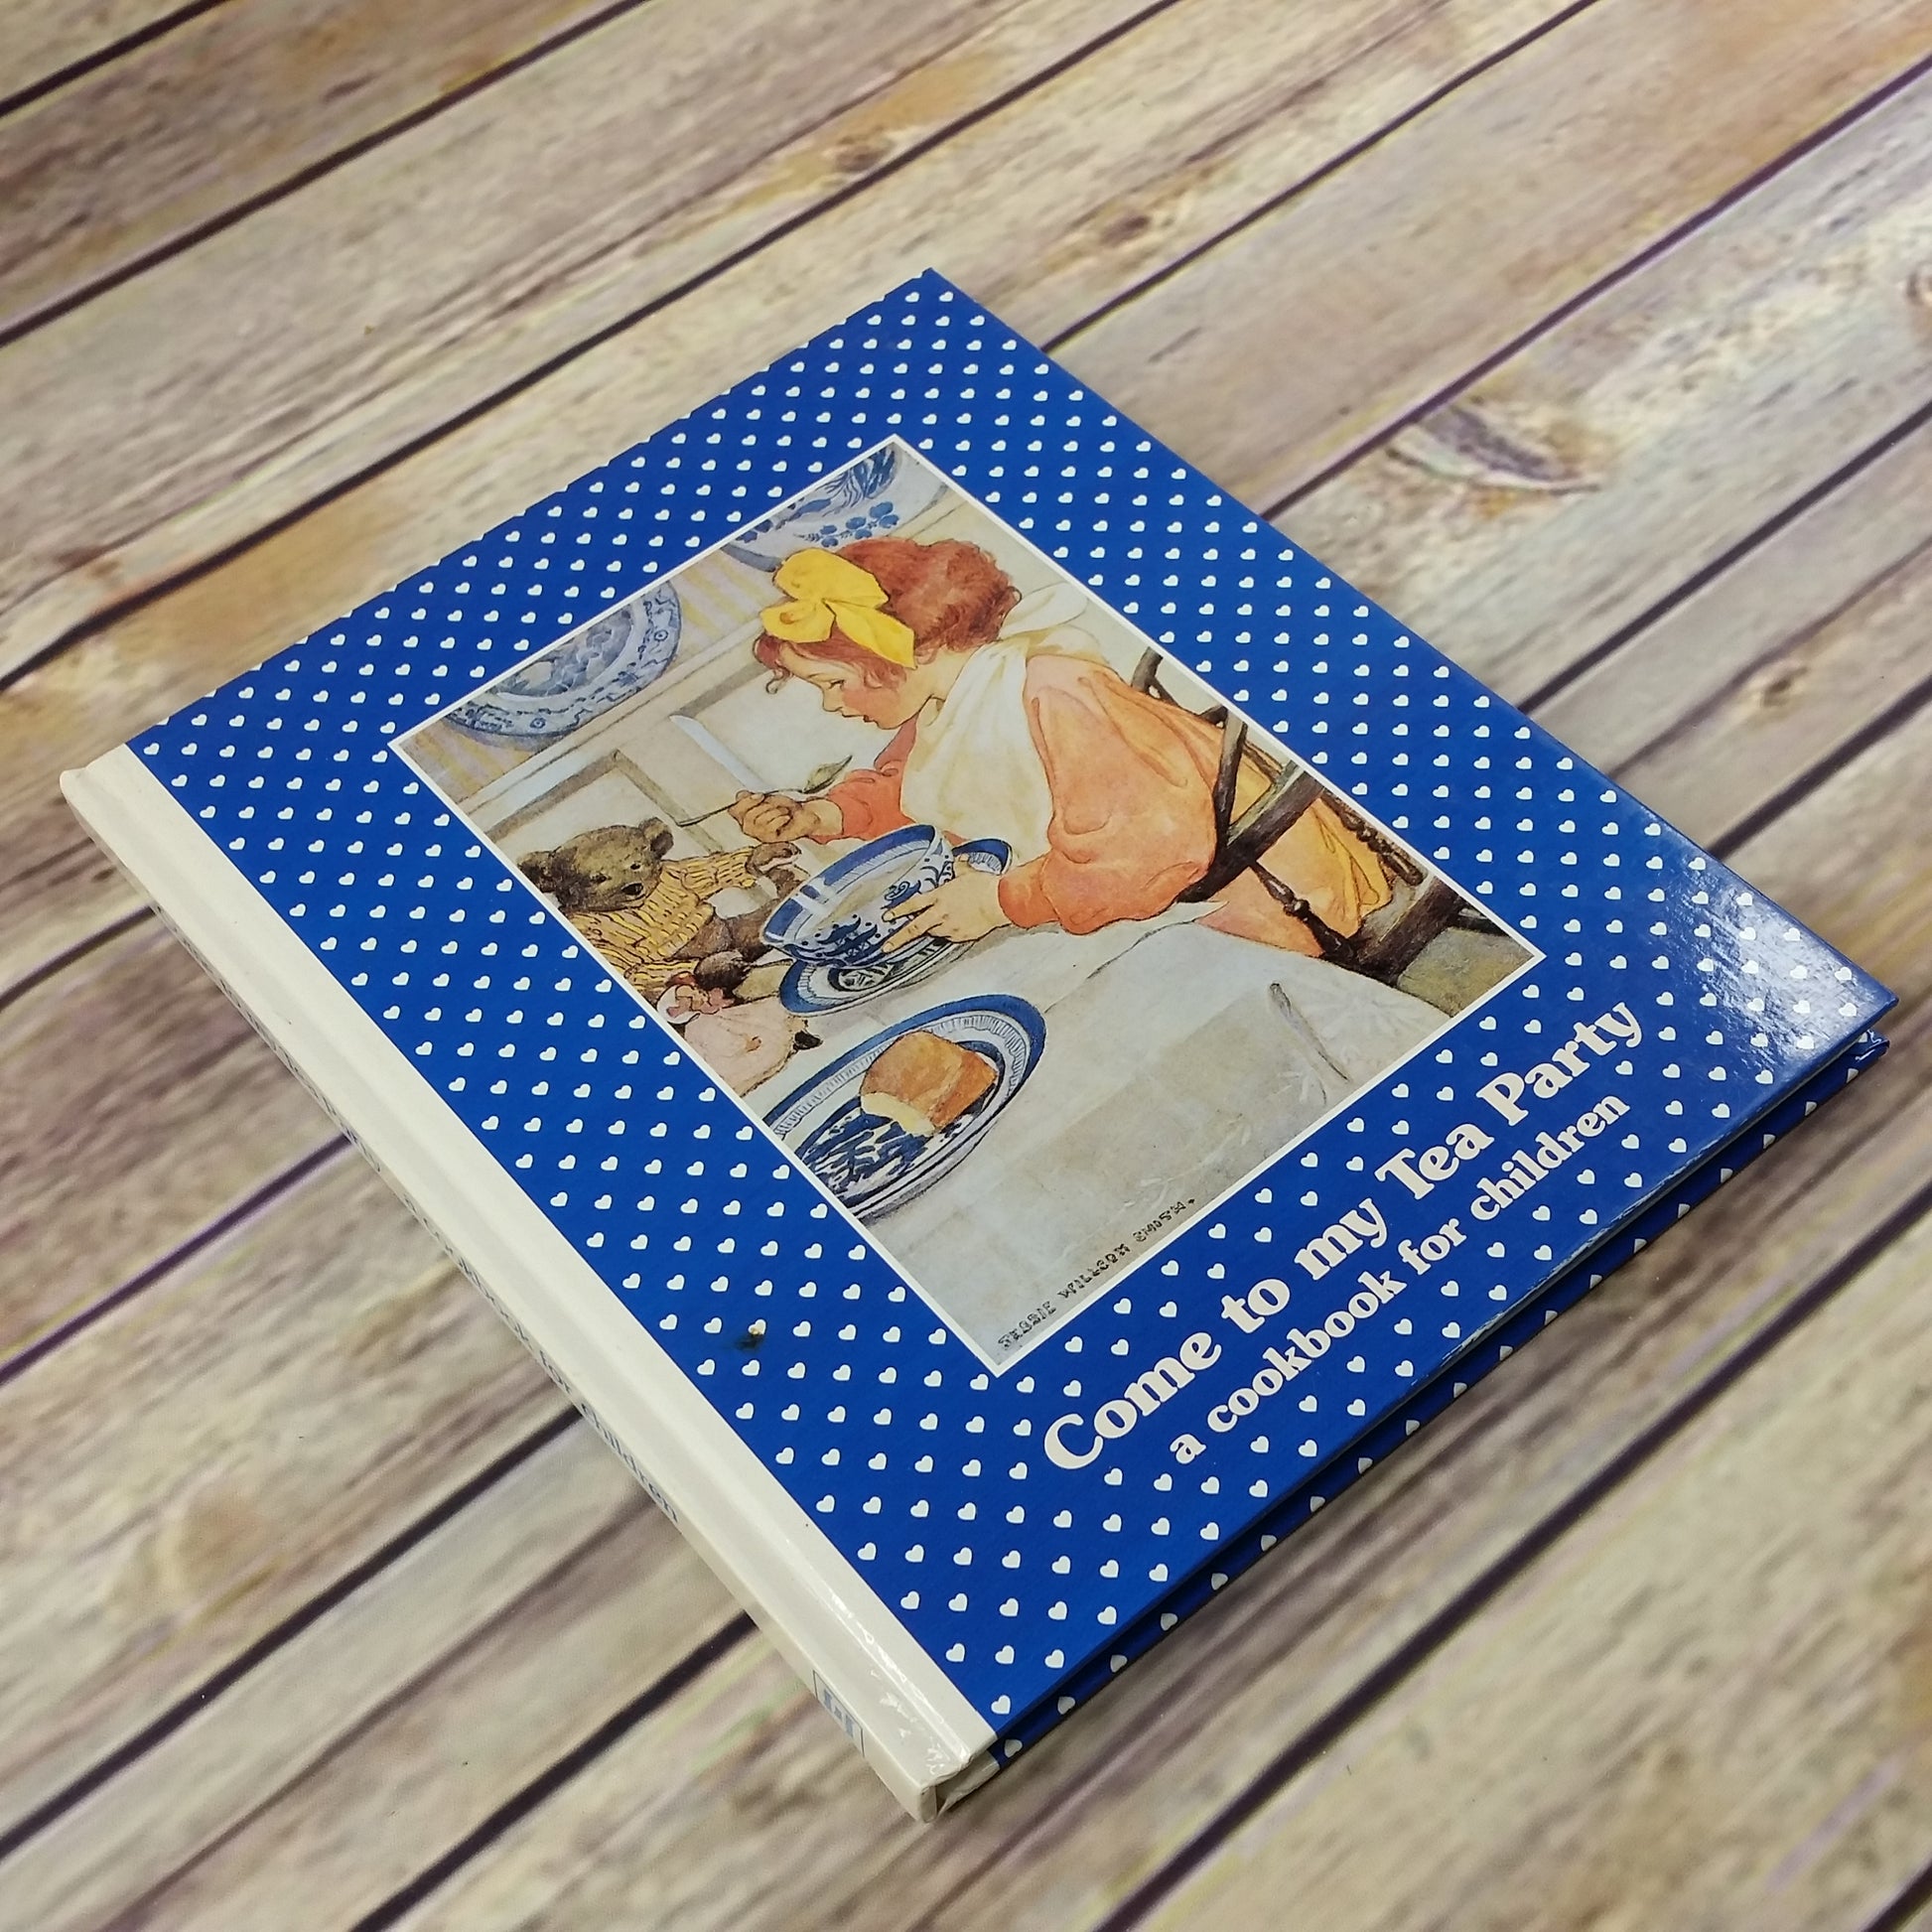 Vintage Kids Cookbook Come to my Tea Party Hardcover Childrens Cook Book Nancy Akmon 1997 - At Grandma's Table